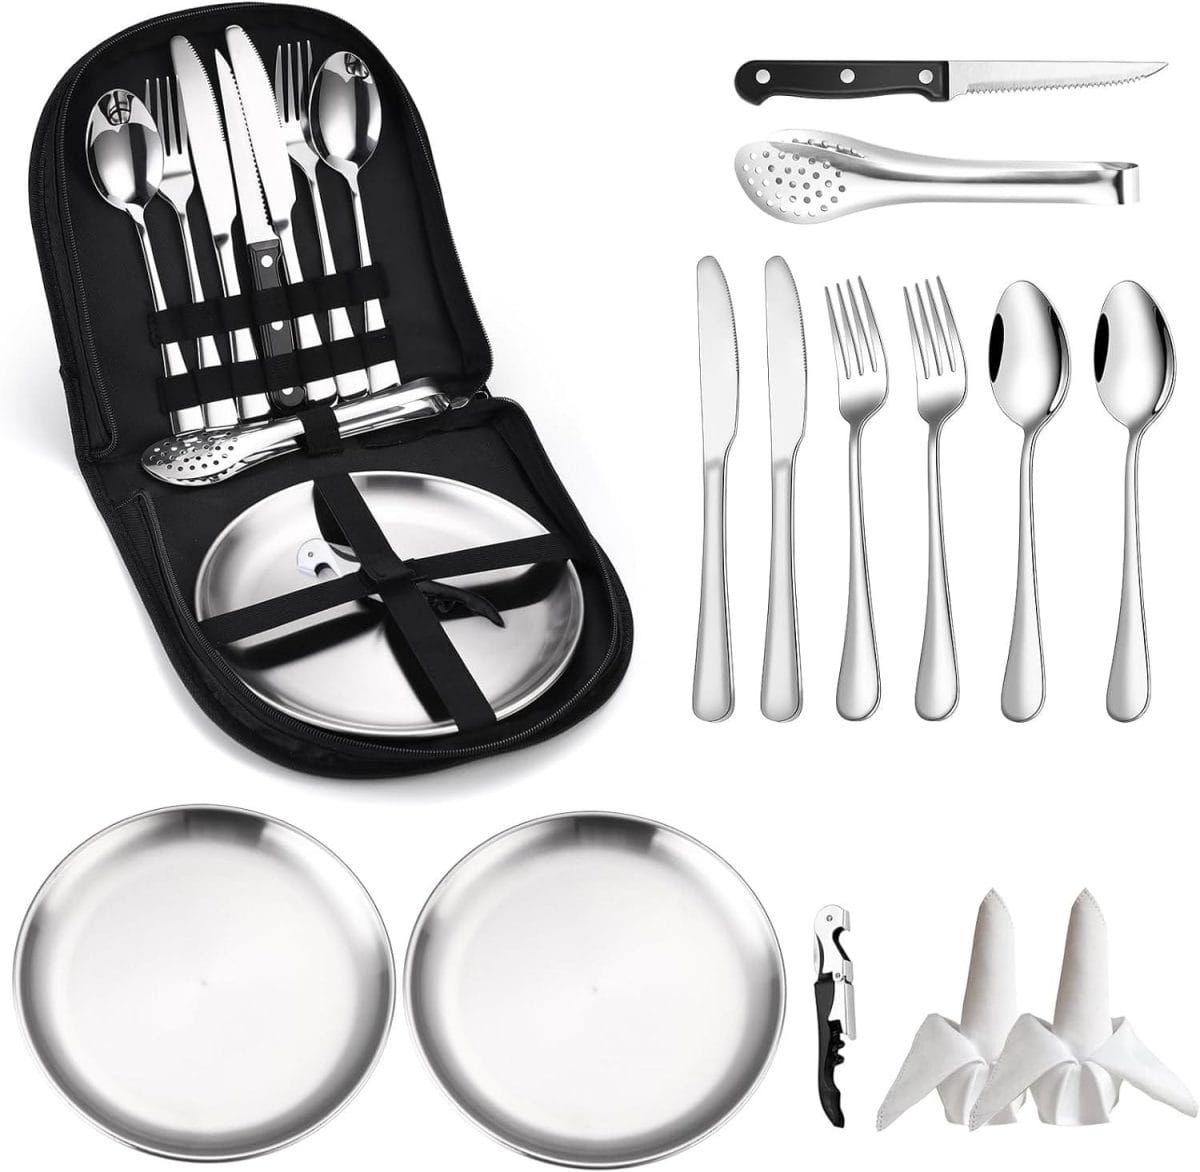 Camping Silverware Kit Cutlery Organizer Utensil Picnic Set Stainless Steel Plate Spoon Clip and Serrated Knife Wine Opener Fork Napkin Hiking - Camp Kitchen BBQ’s